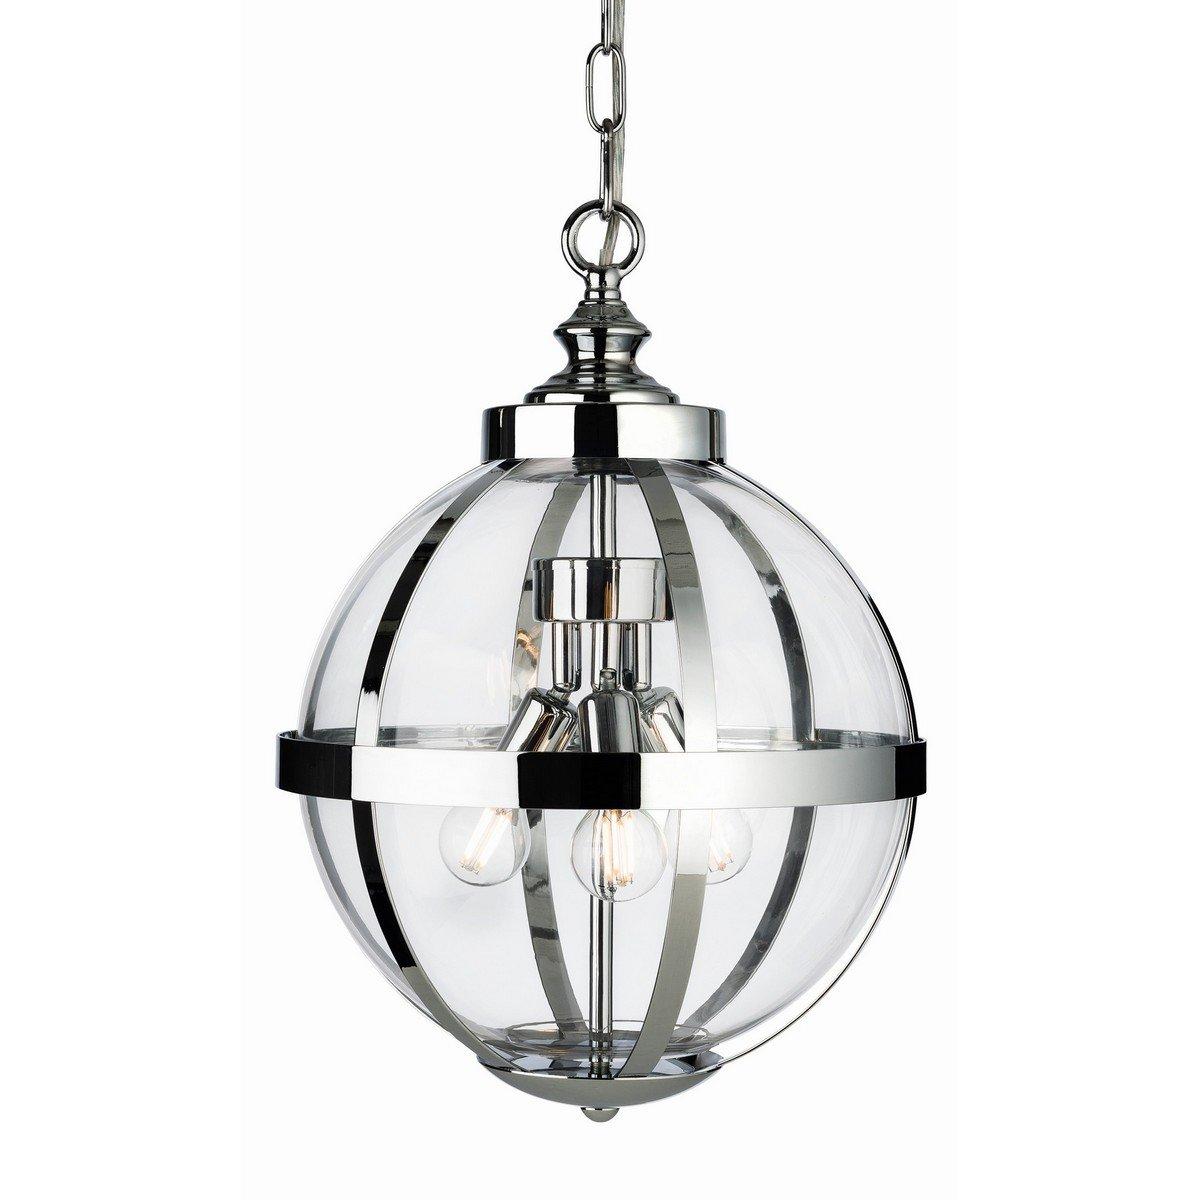 Monroe 3 Light Cage Ceiling Pendant Chrome with Clear Glass E14